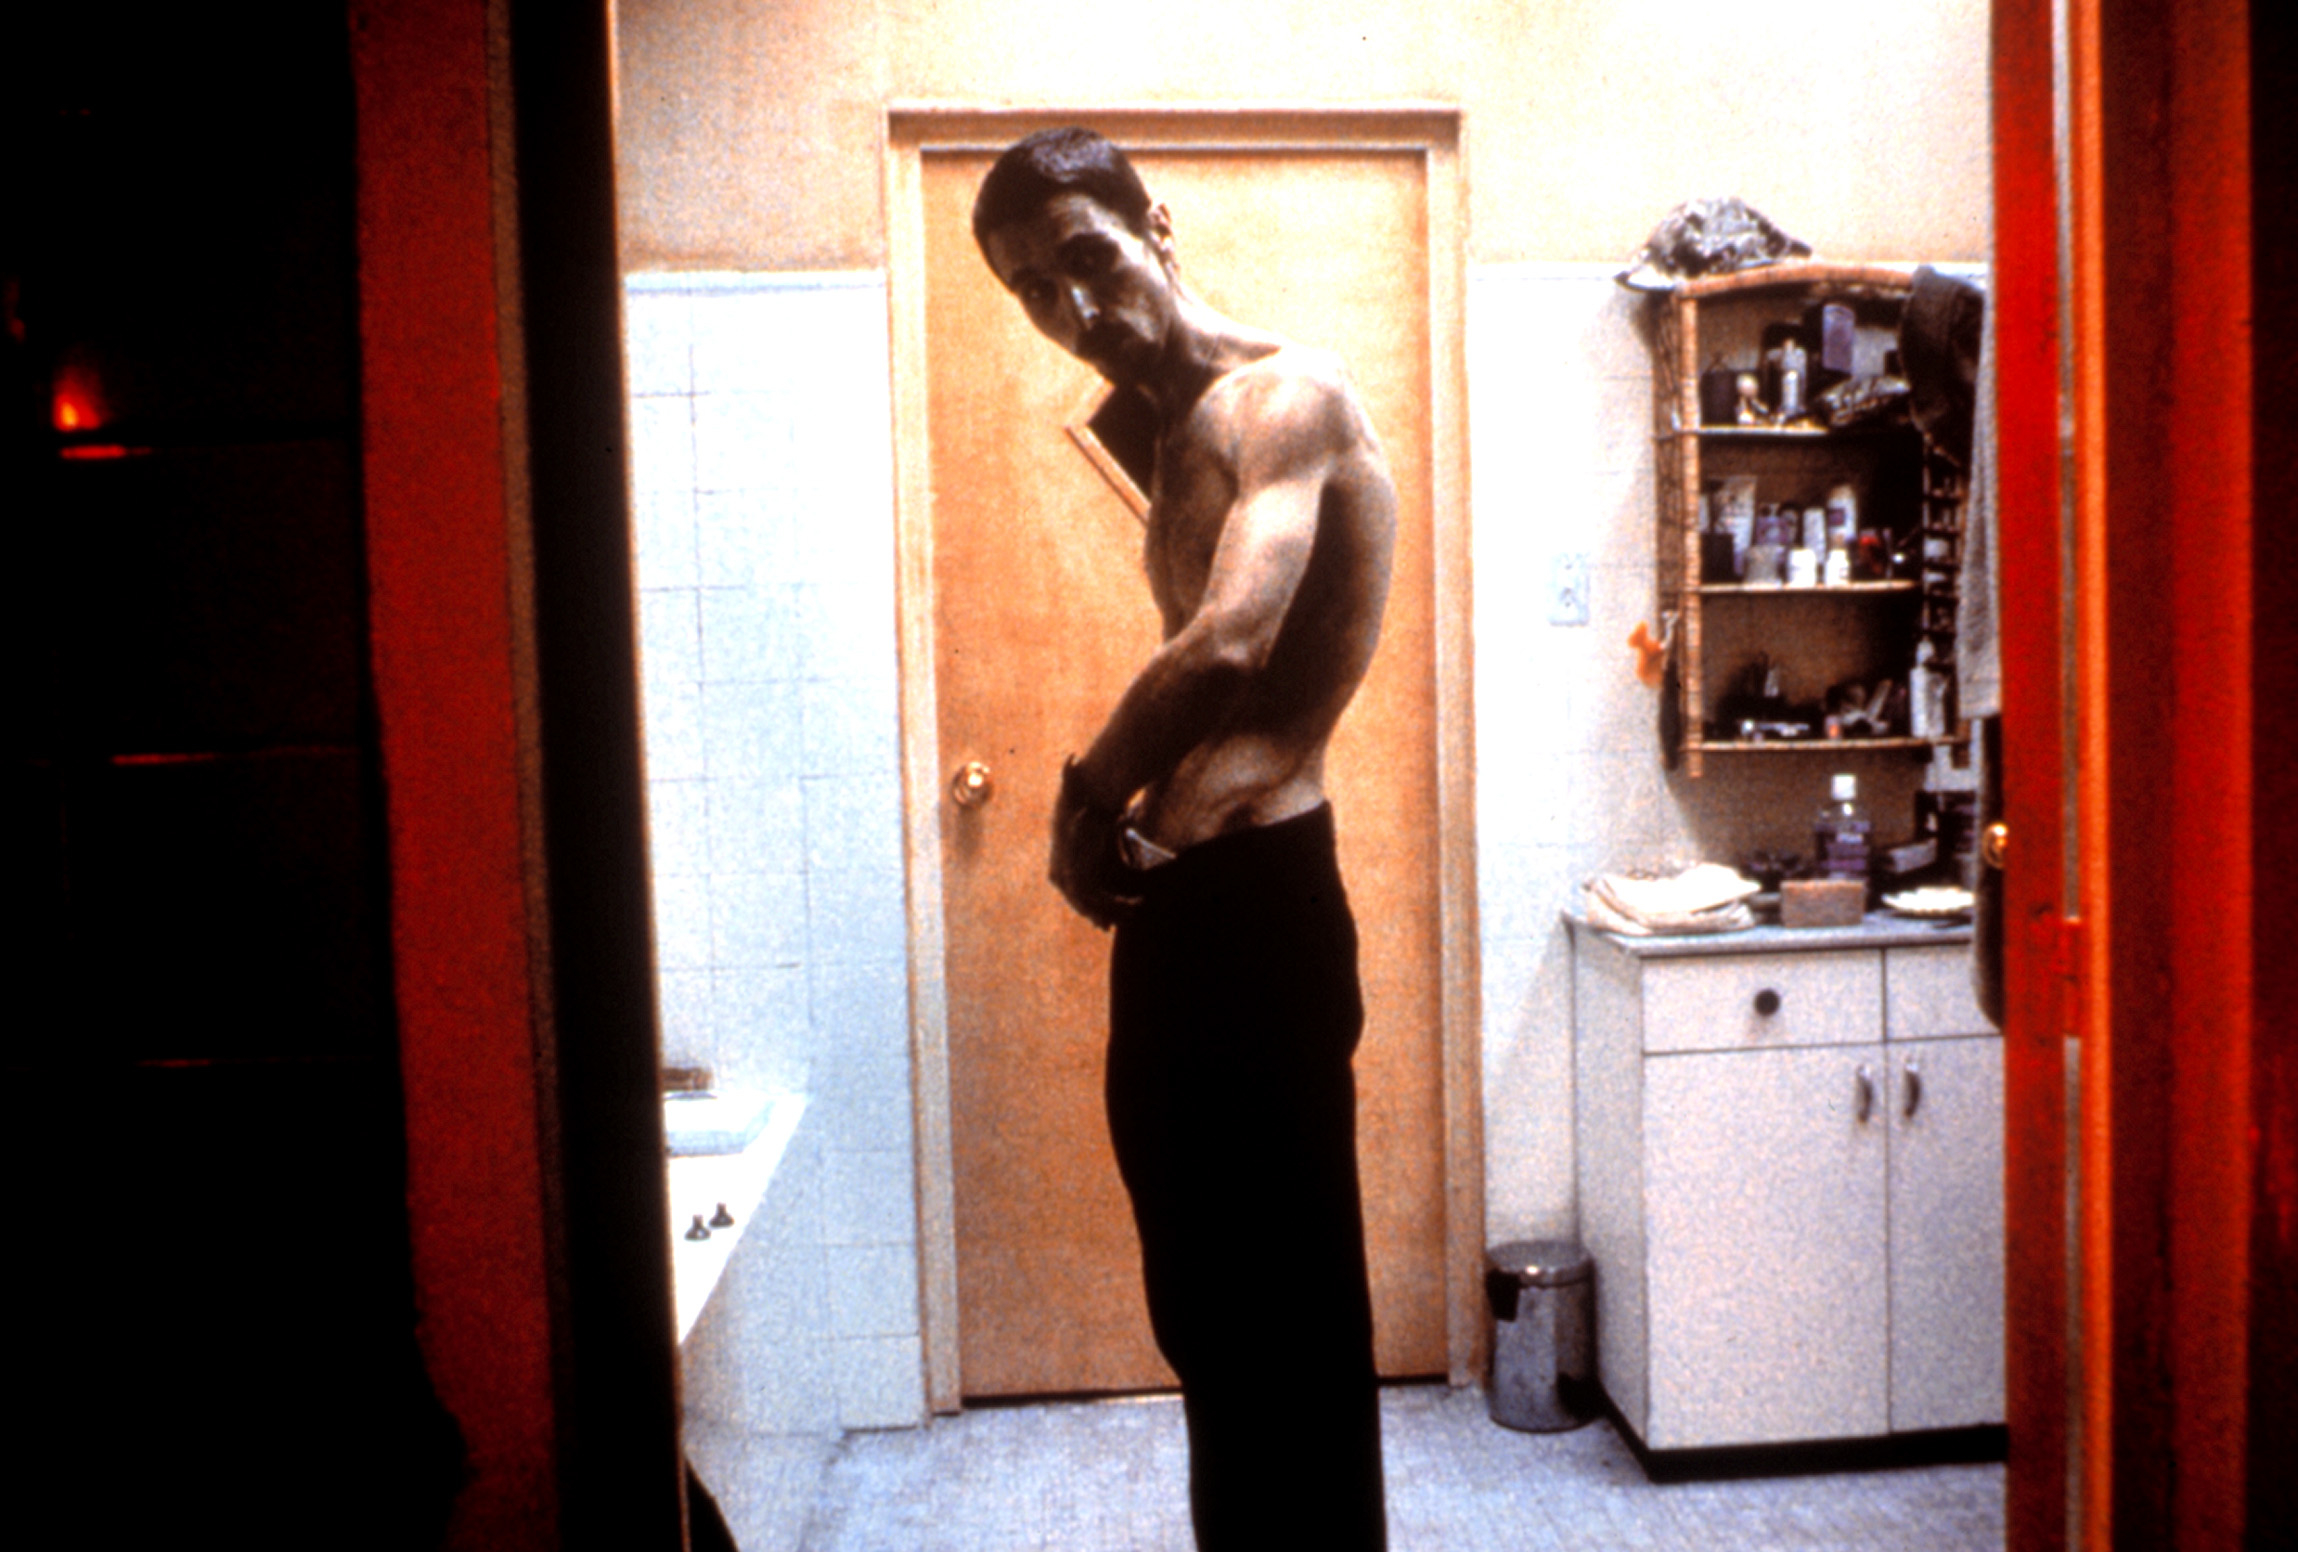 profile view of him and his very thin body in the movie